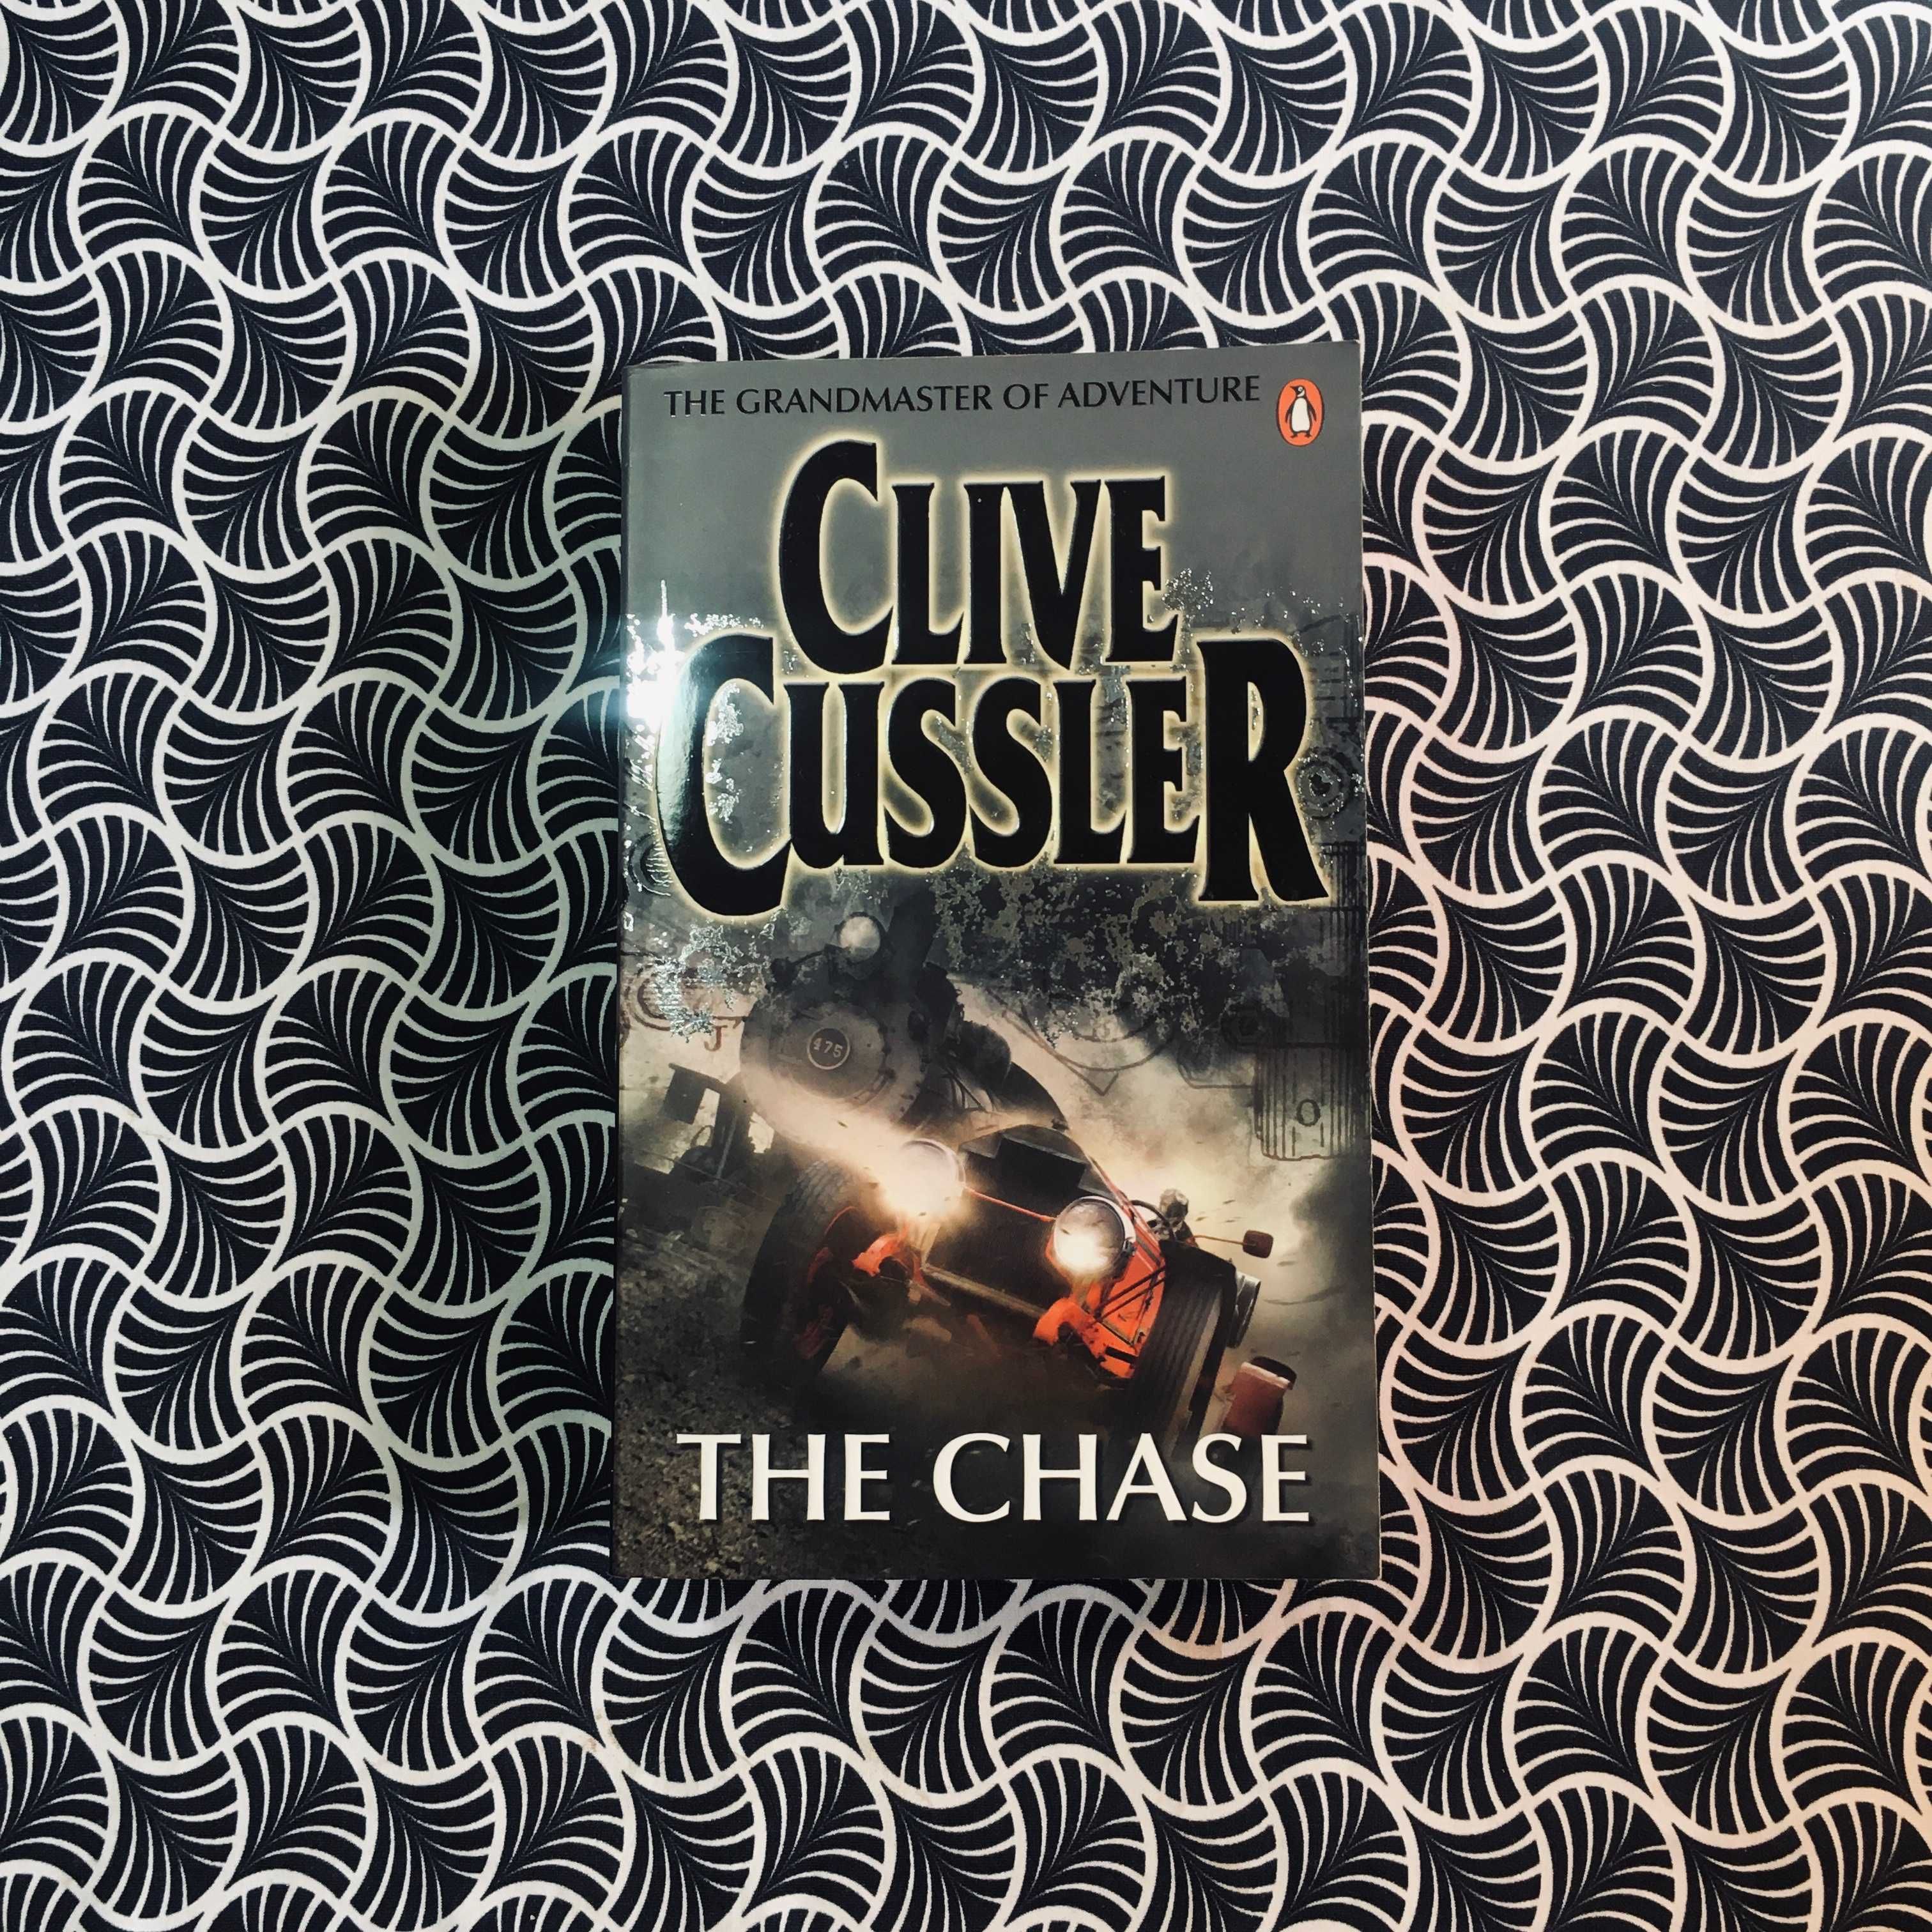 The Chase - Clive Cussler